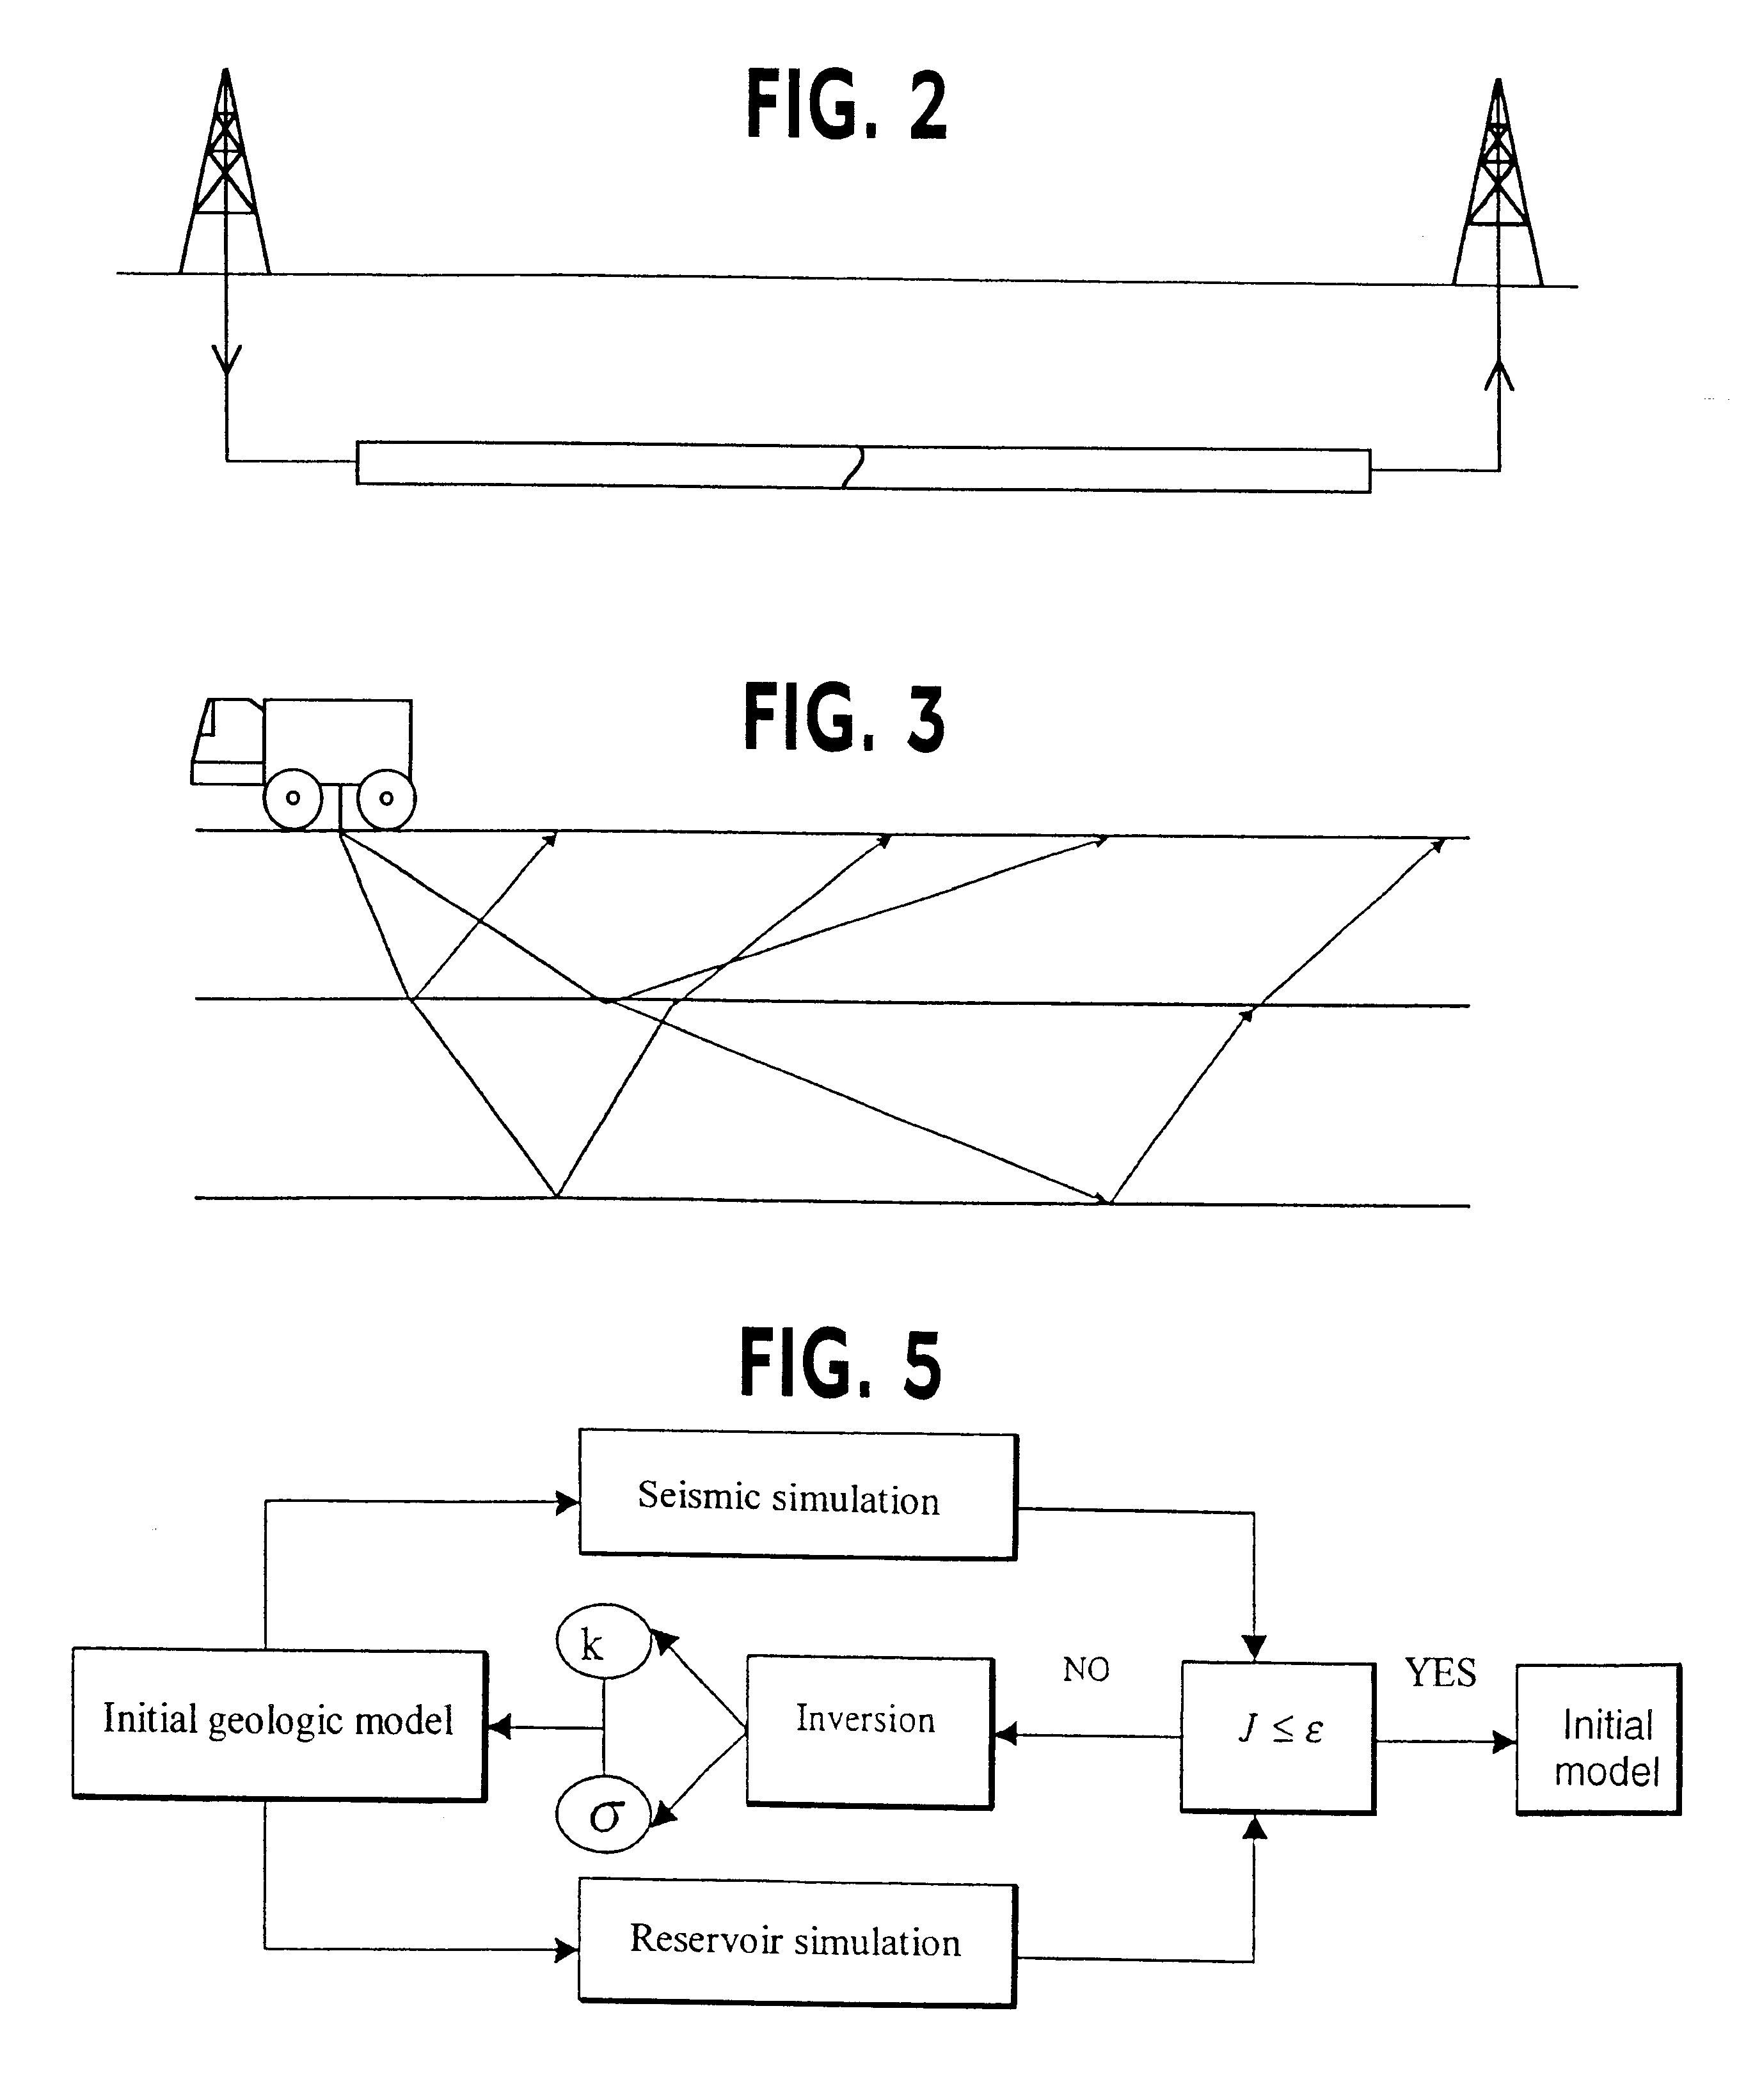 Method for forming a model of a geologic formation, constrained by dynamic and static data